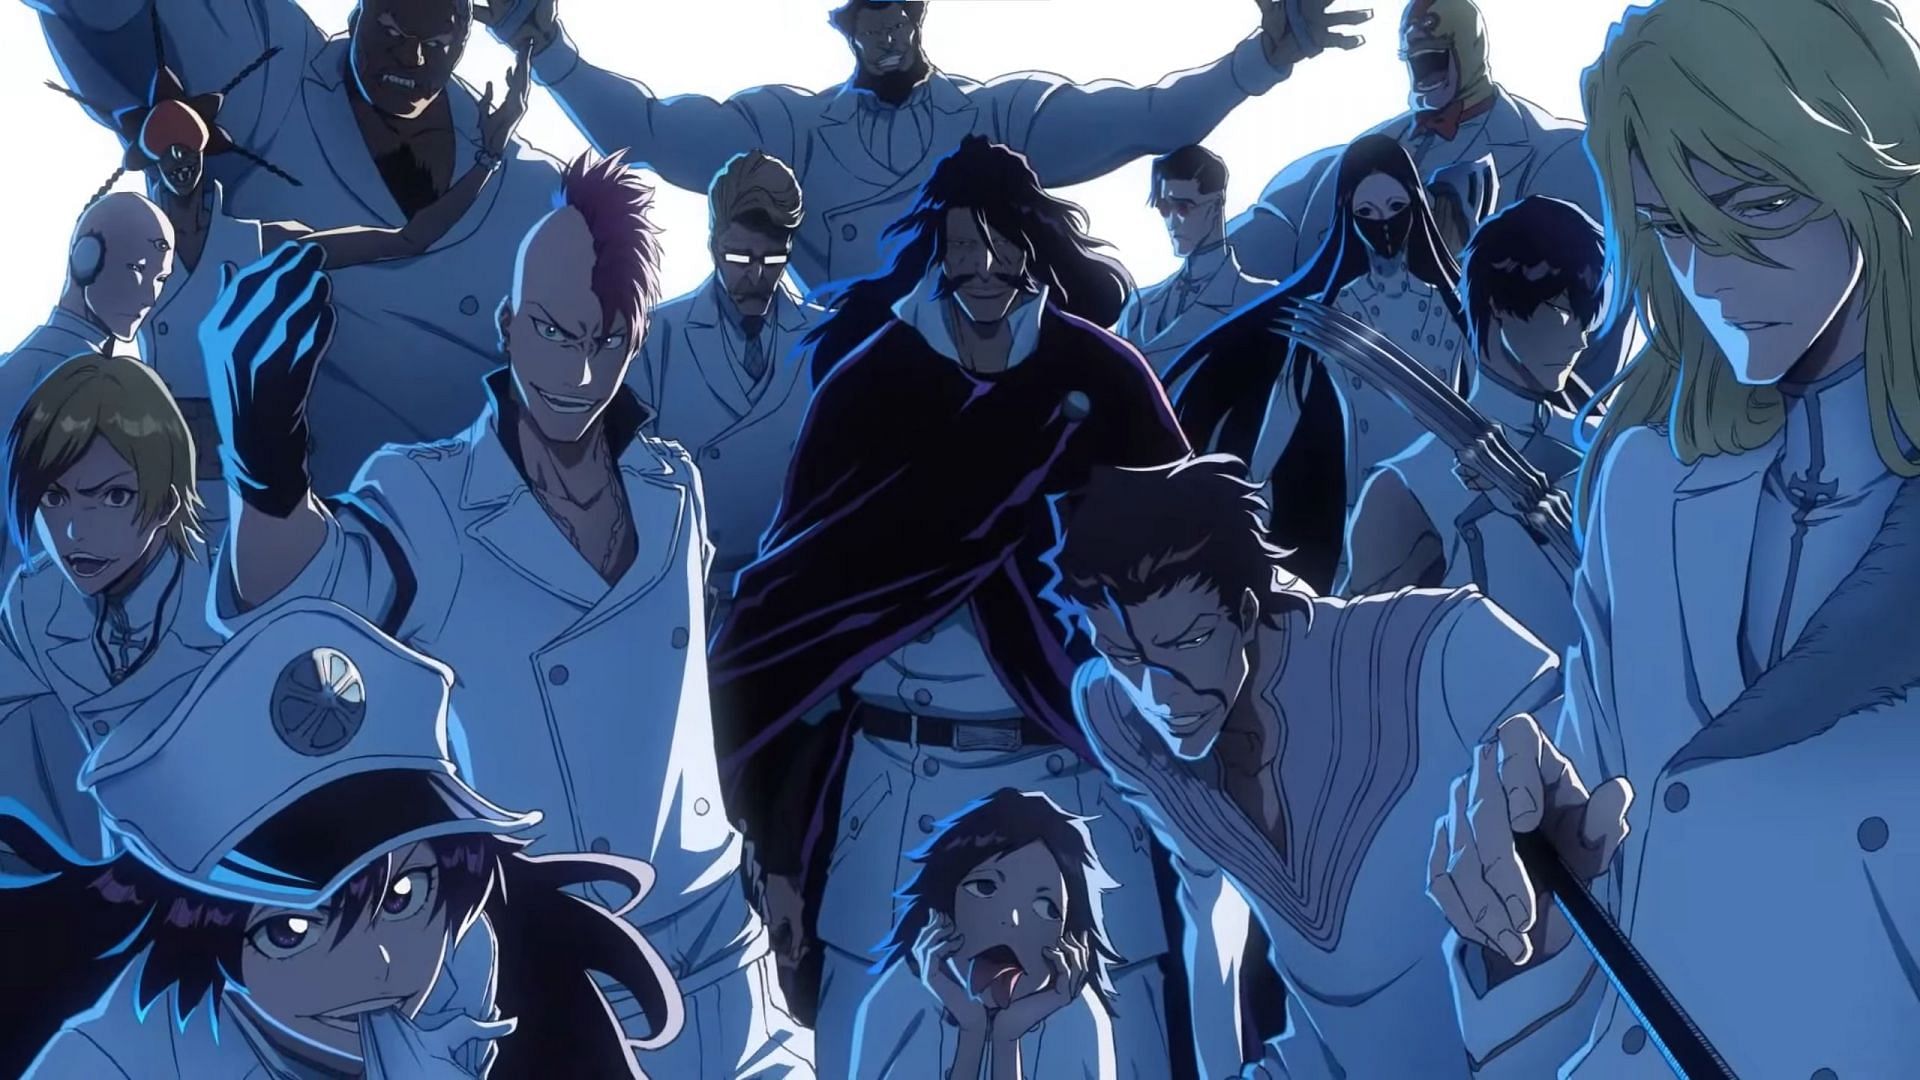 10 Anime That Never Topped Their Original Opening Themes